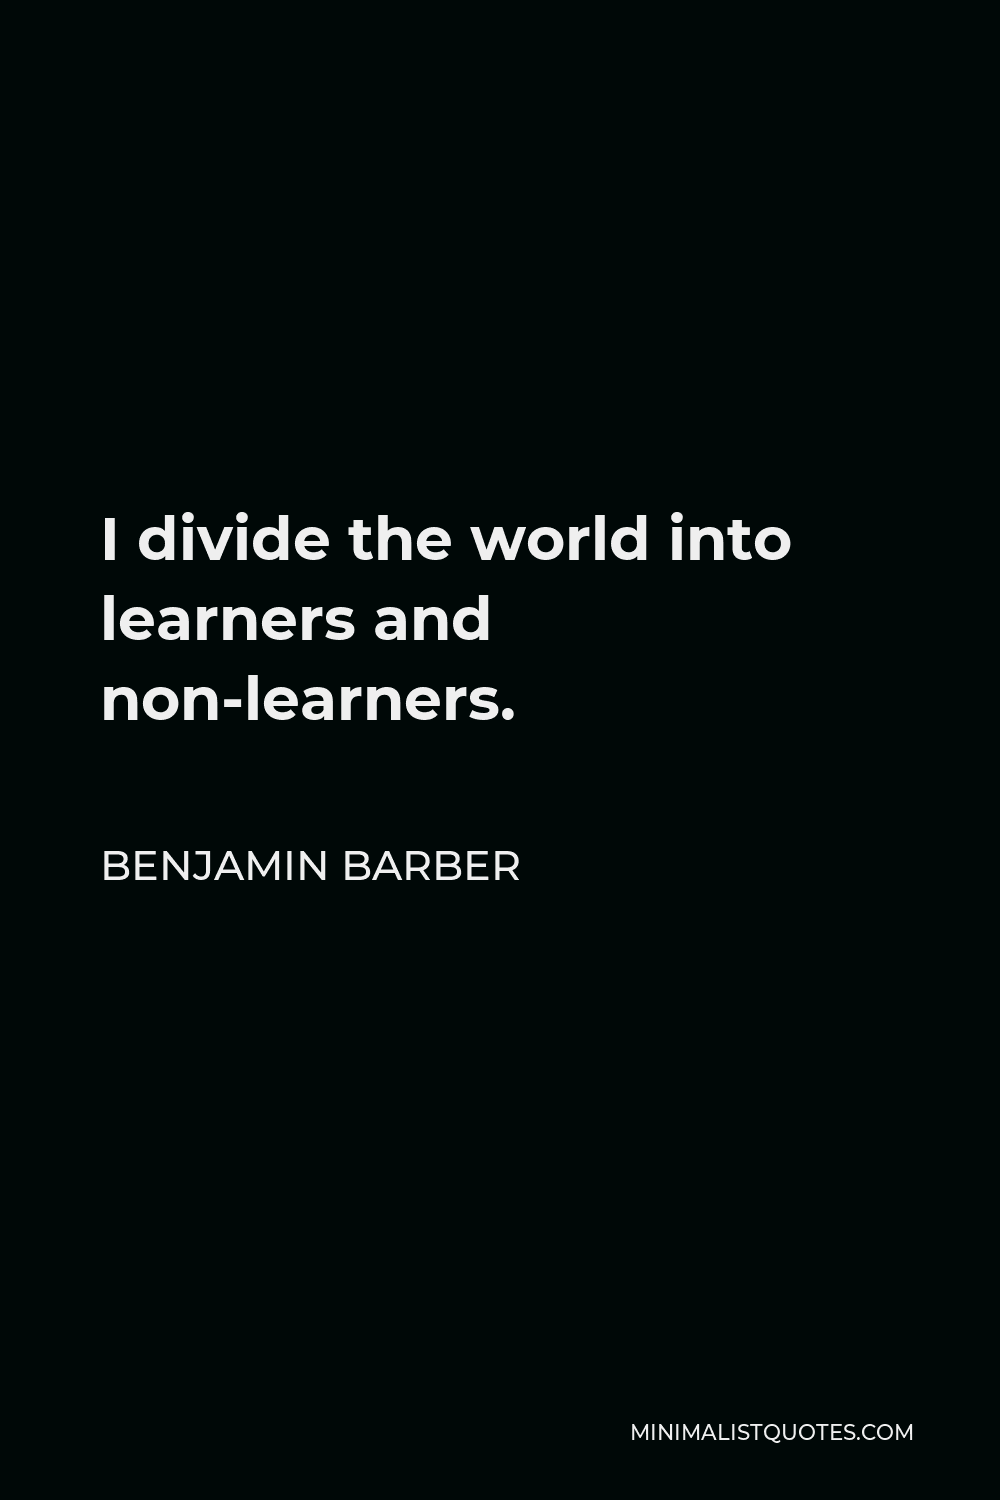 Benjamin Barber Quote - I divide the world into learners and non-learners.